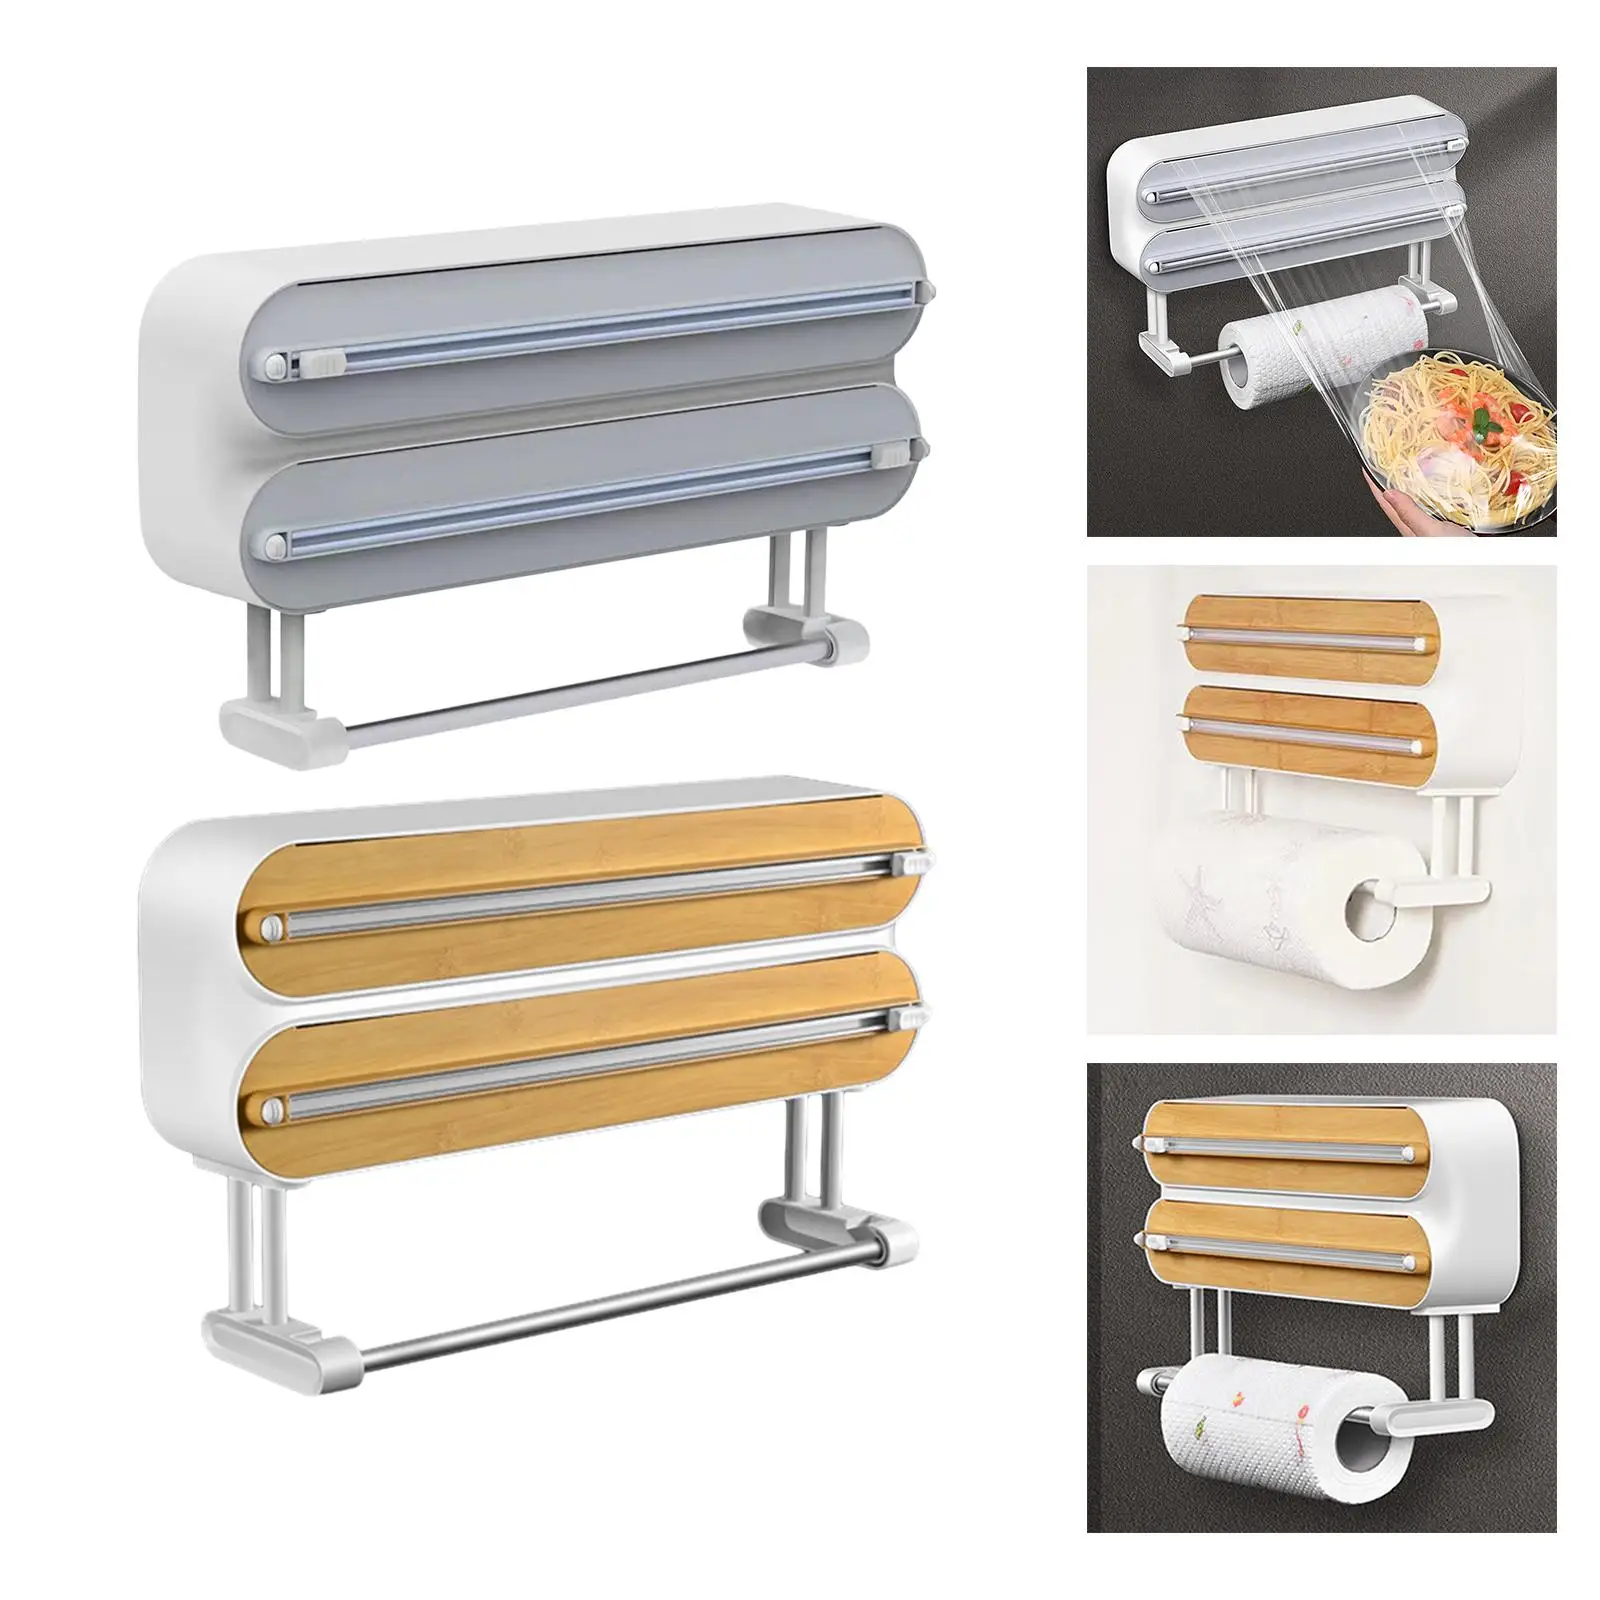 Cling Film Dispenser with Cutter Household Food Wrap Cutter Slide Cutter Smoothly Cutting Kitchen Roll Holder for Refrigerator